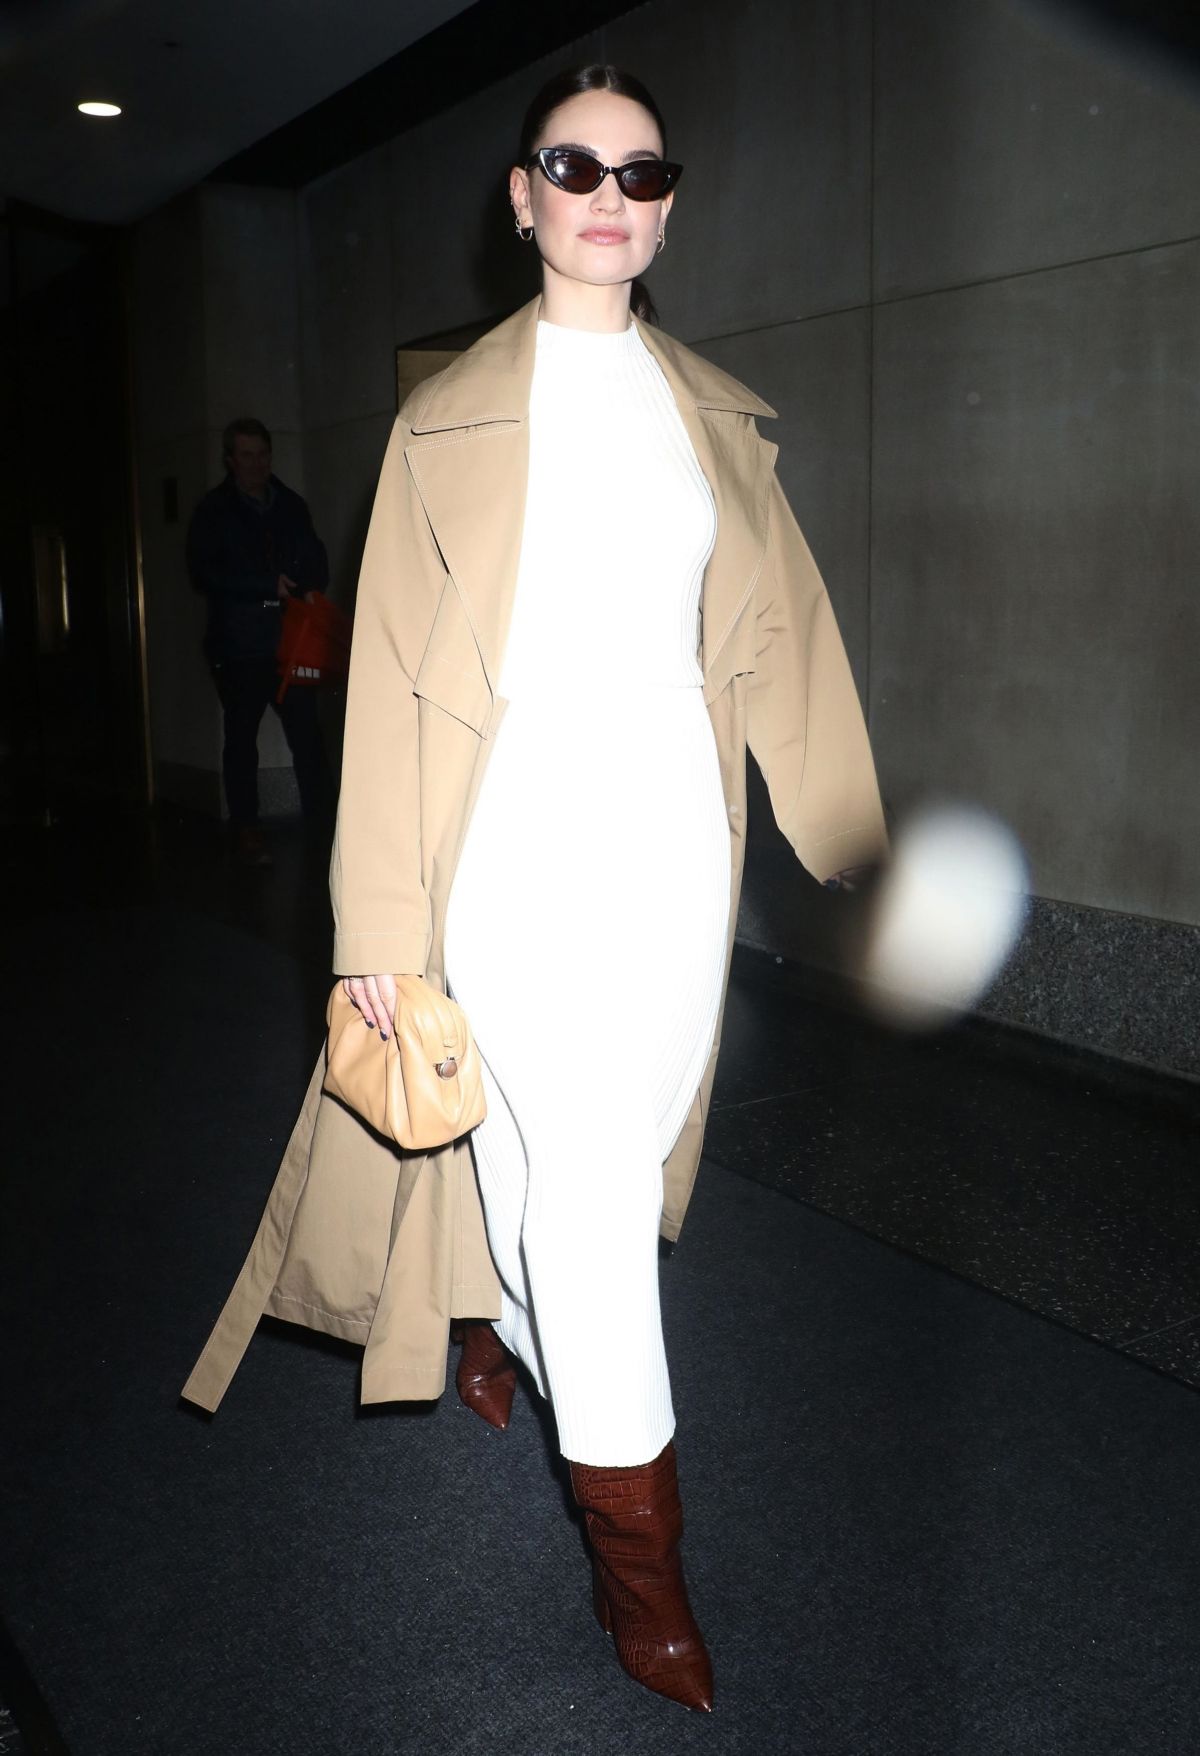 Lily James in White Dress and Brown Boots in Today Show NYC 2